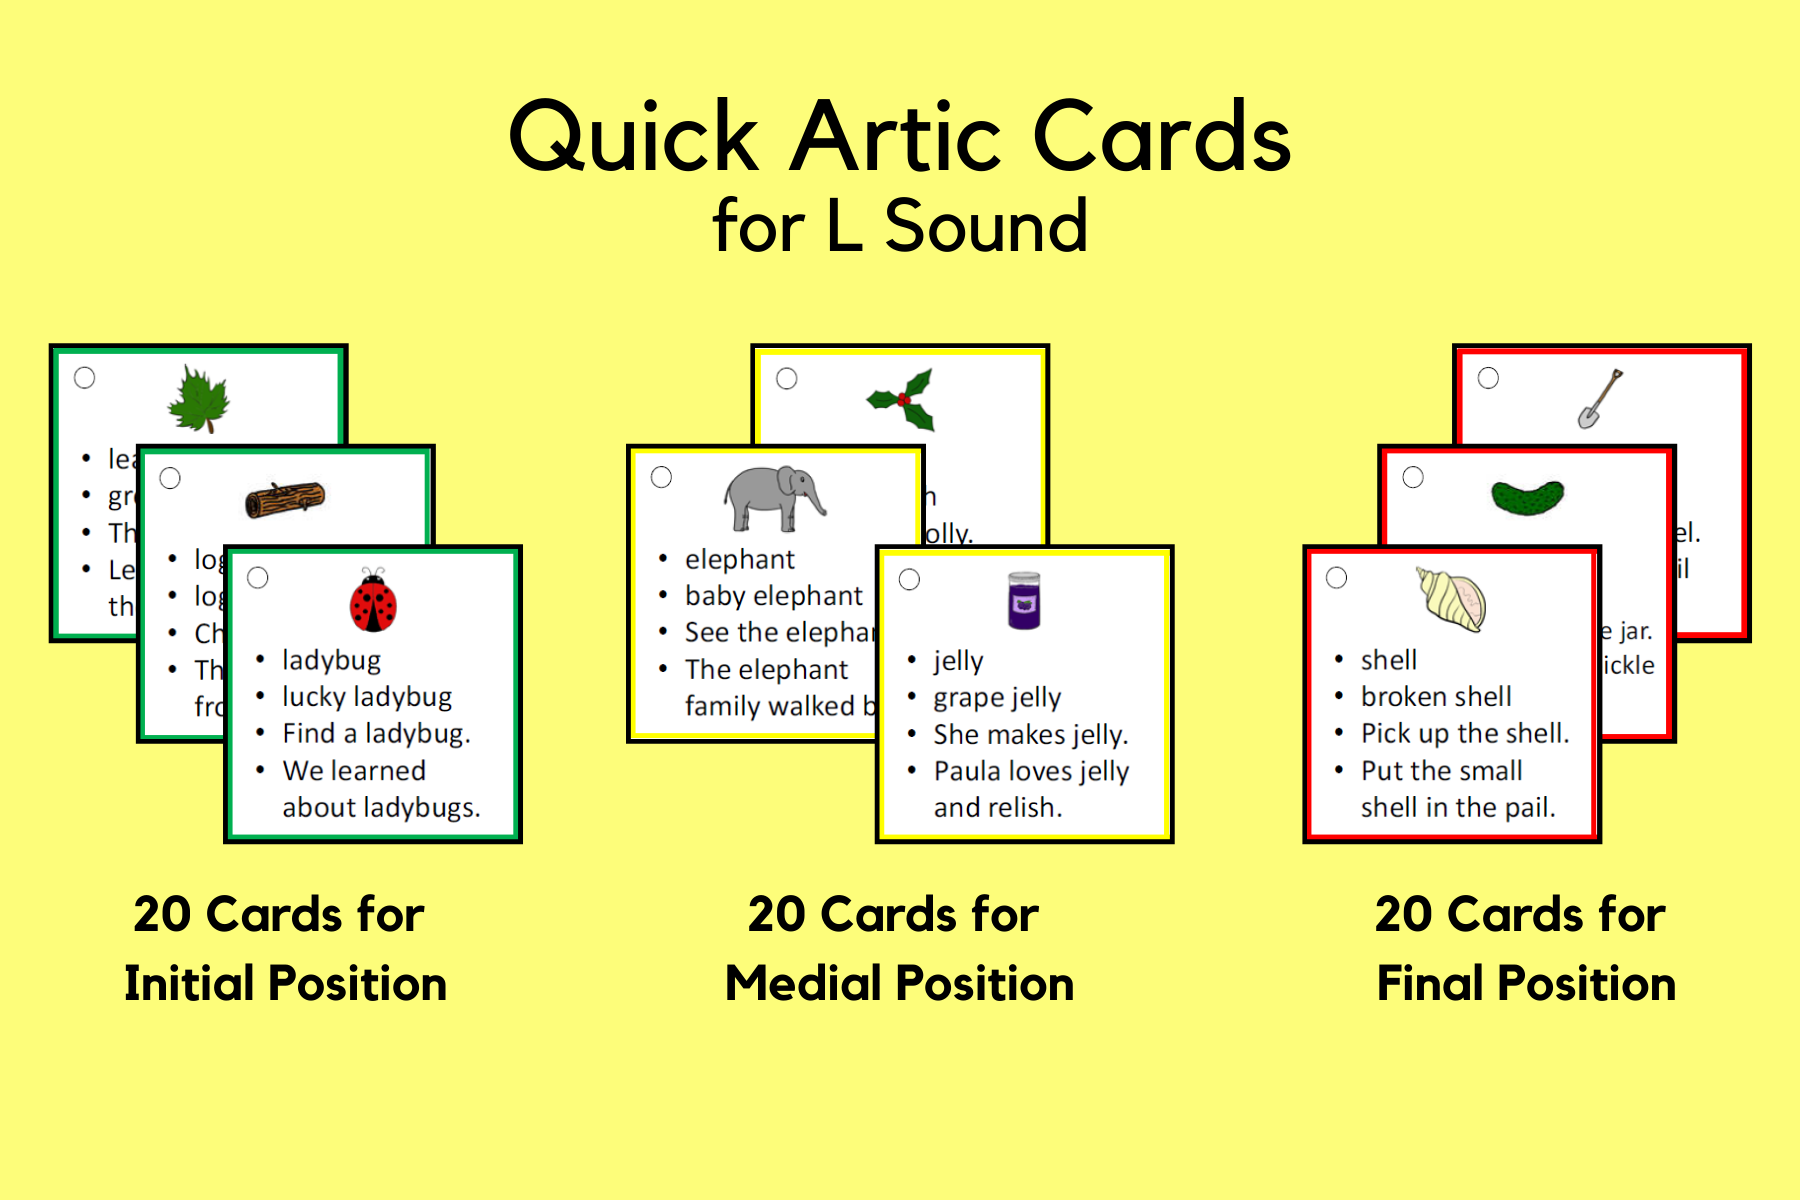 Quick Artic Cards for L Sound